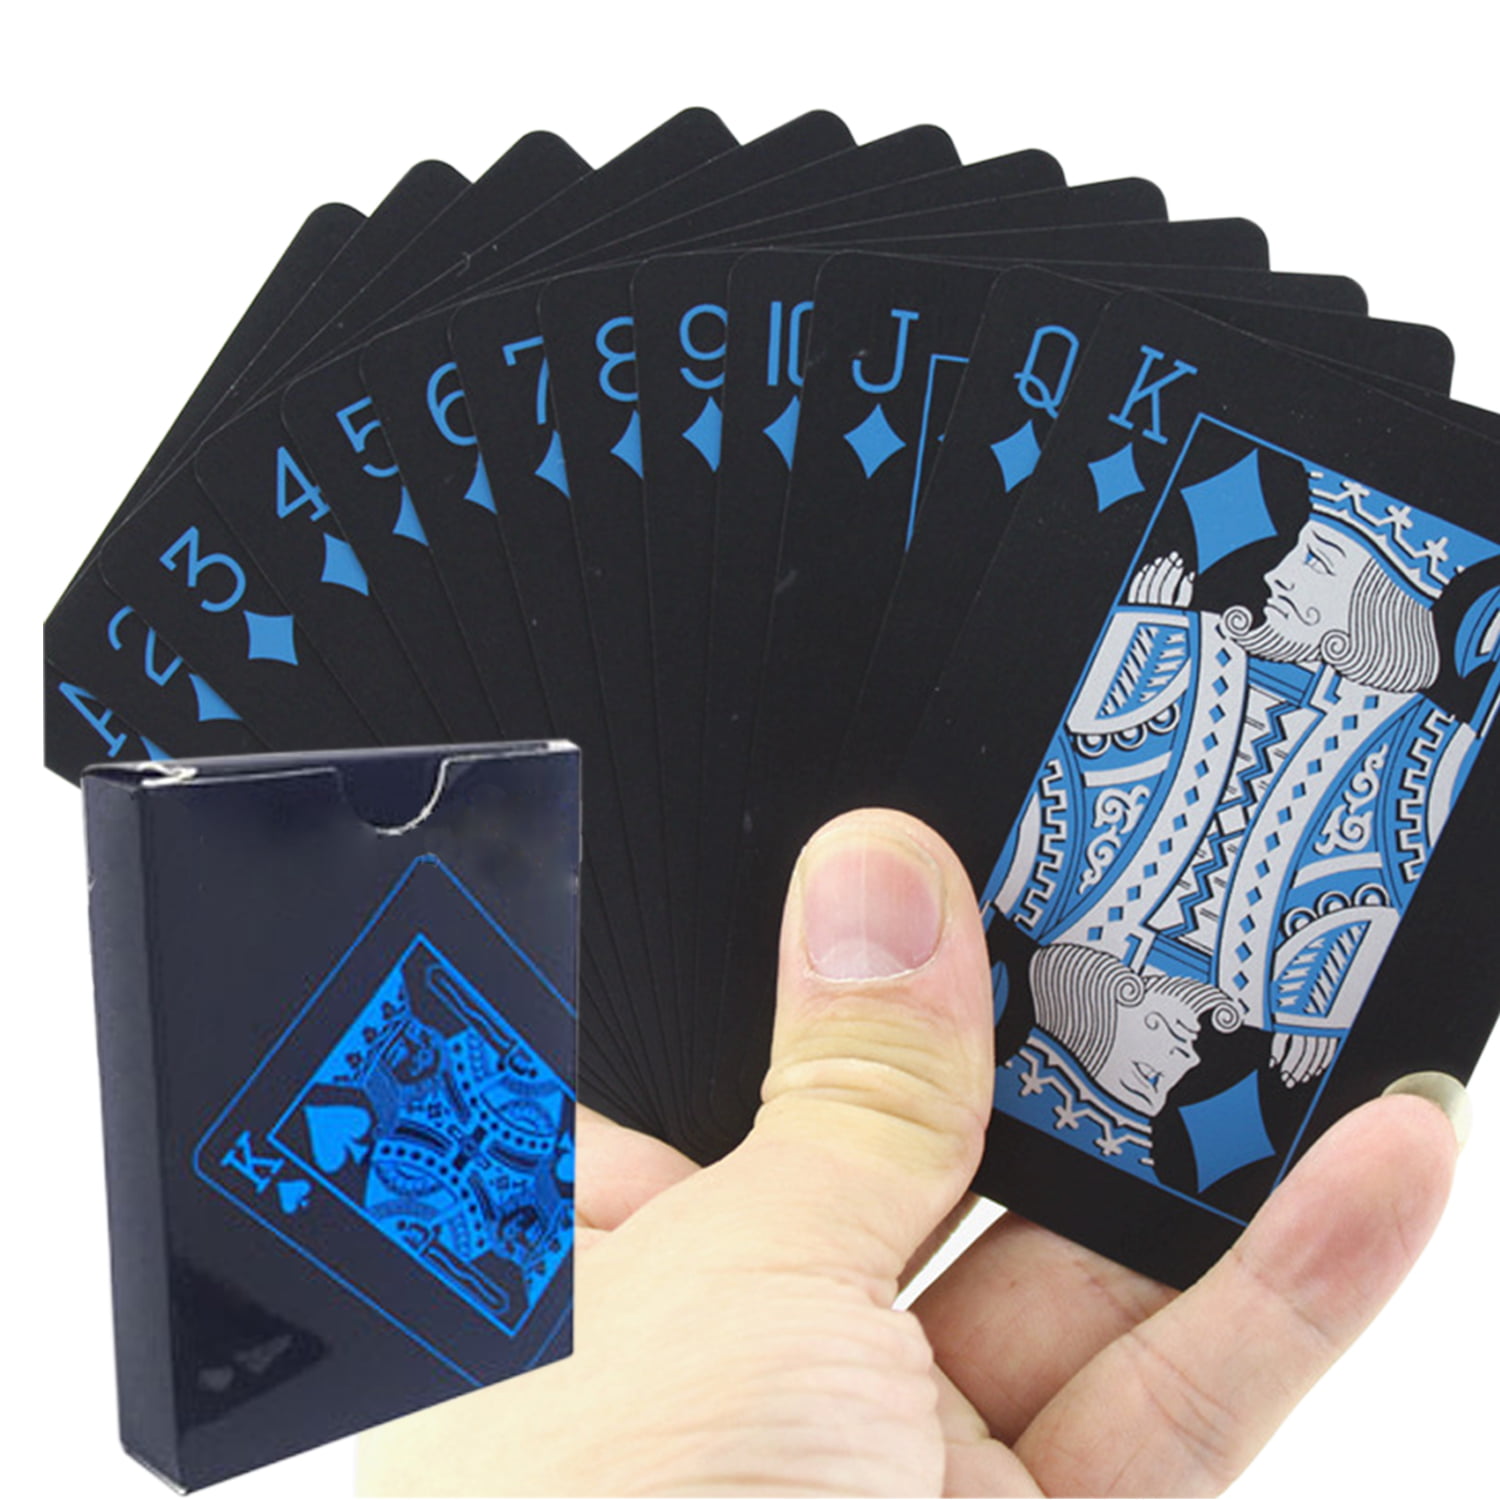 # Travel Waterproof Playing Cards With Waterproof Case 